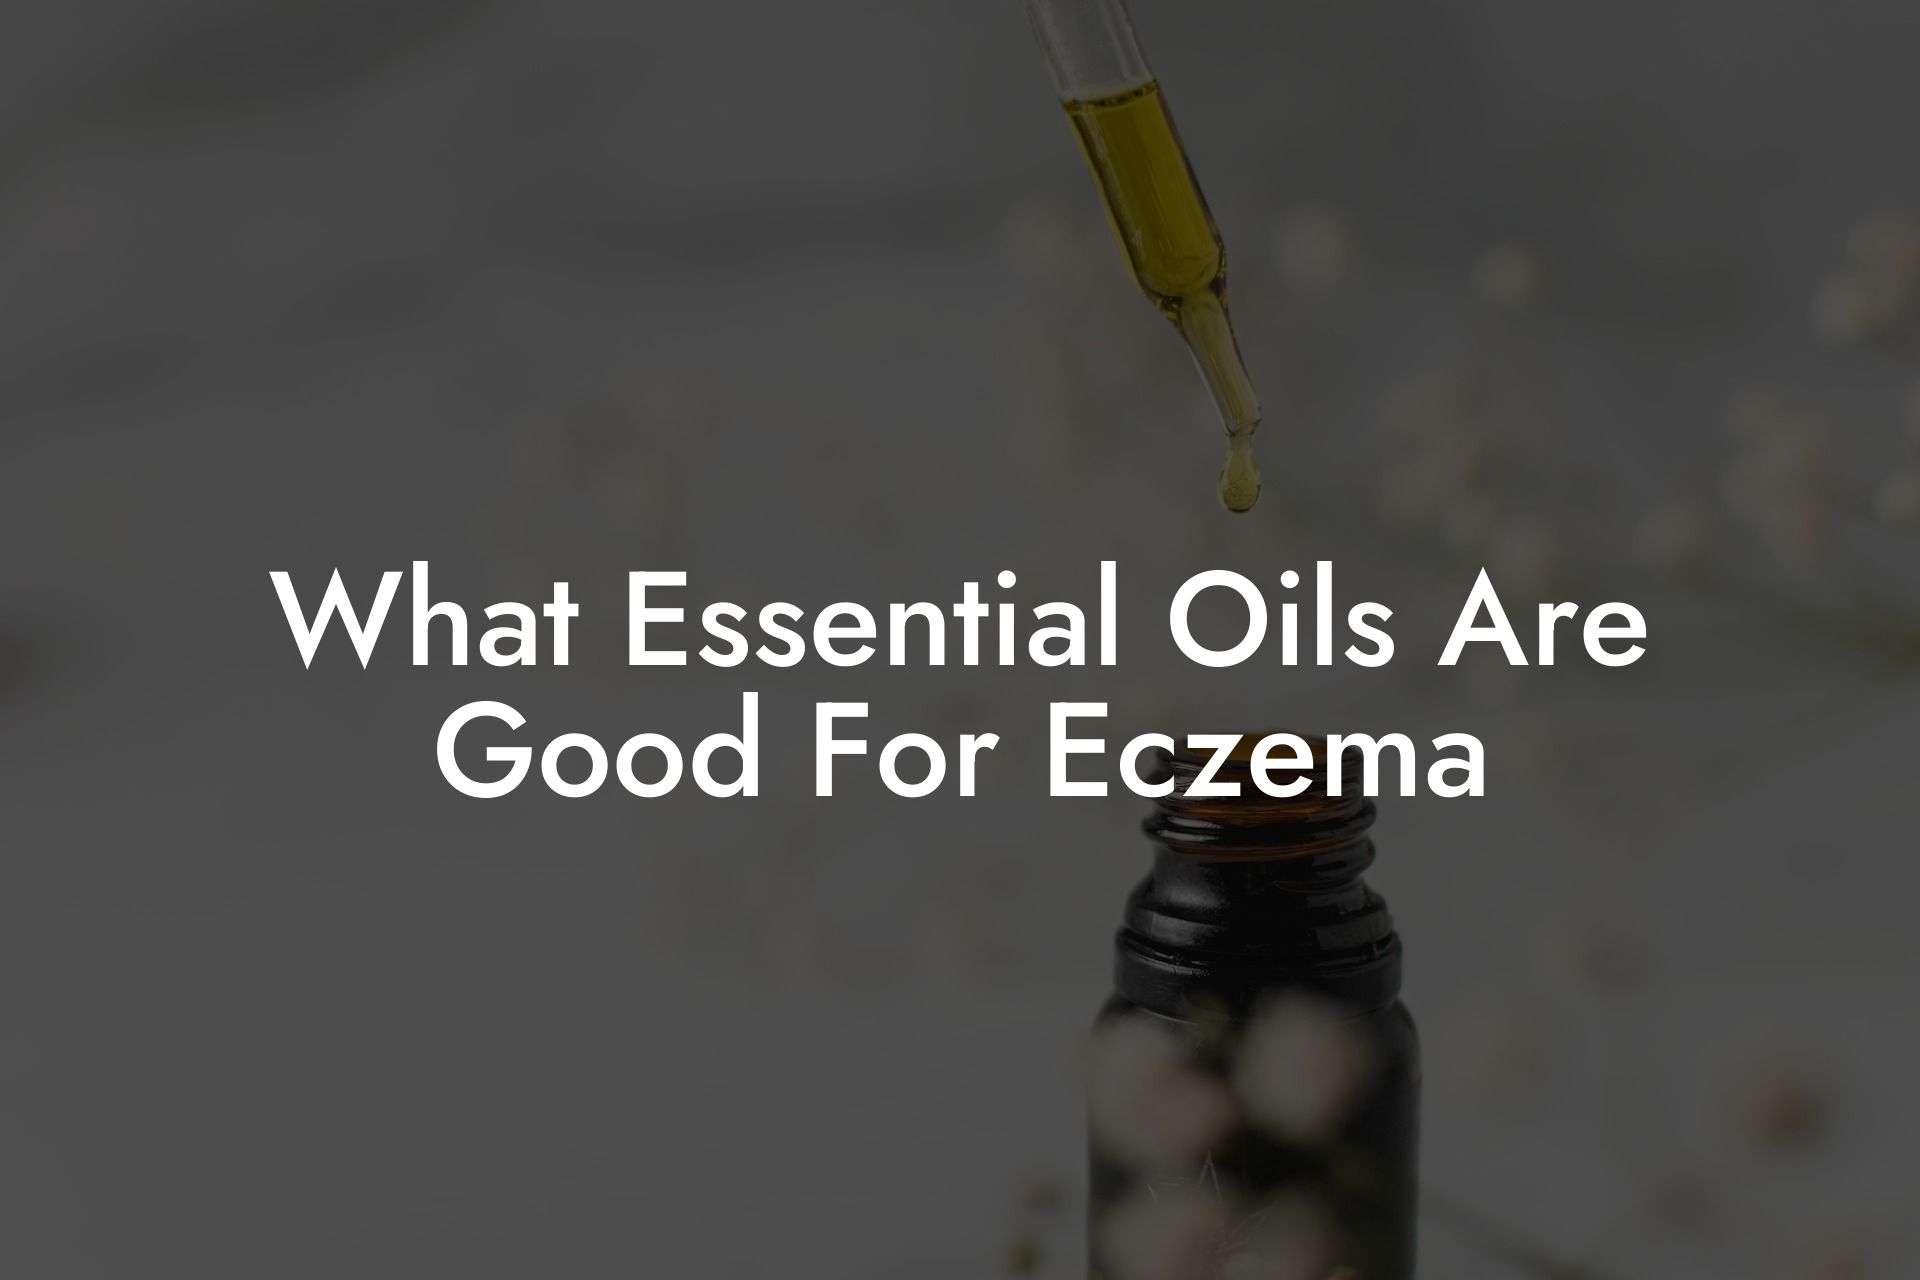 What Essential Oils Are Good For Eczema